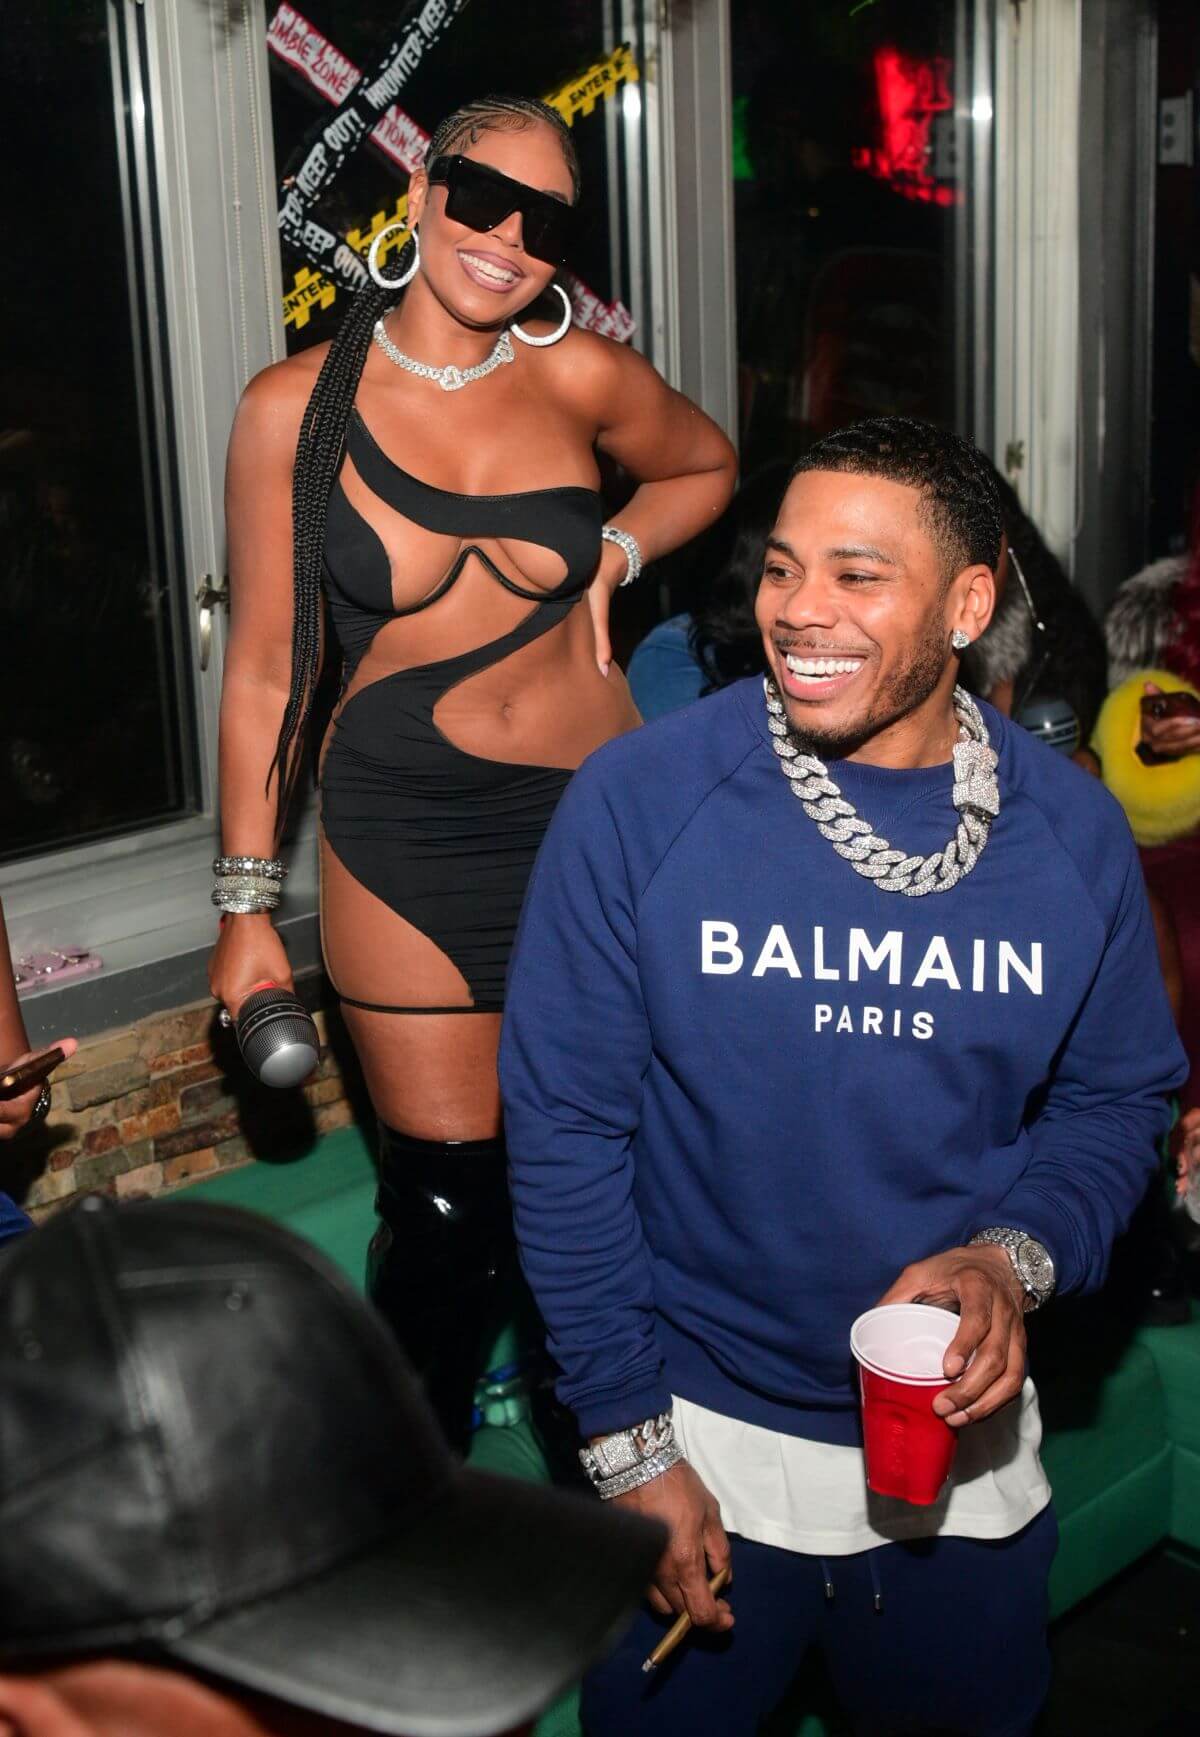 Ashanti and Nelly attend an event together in Atlanta